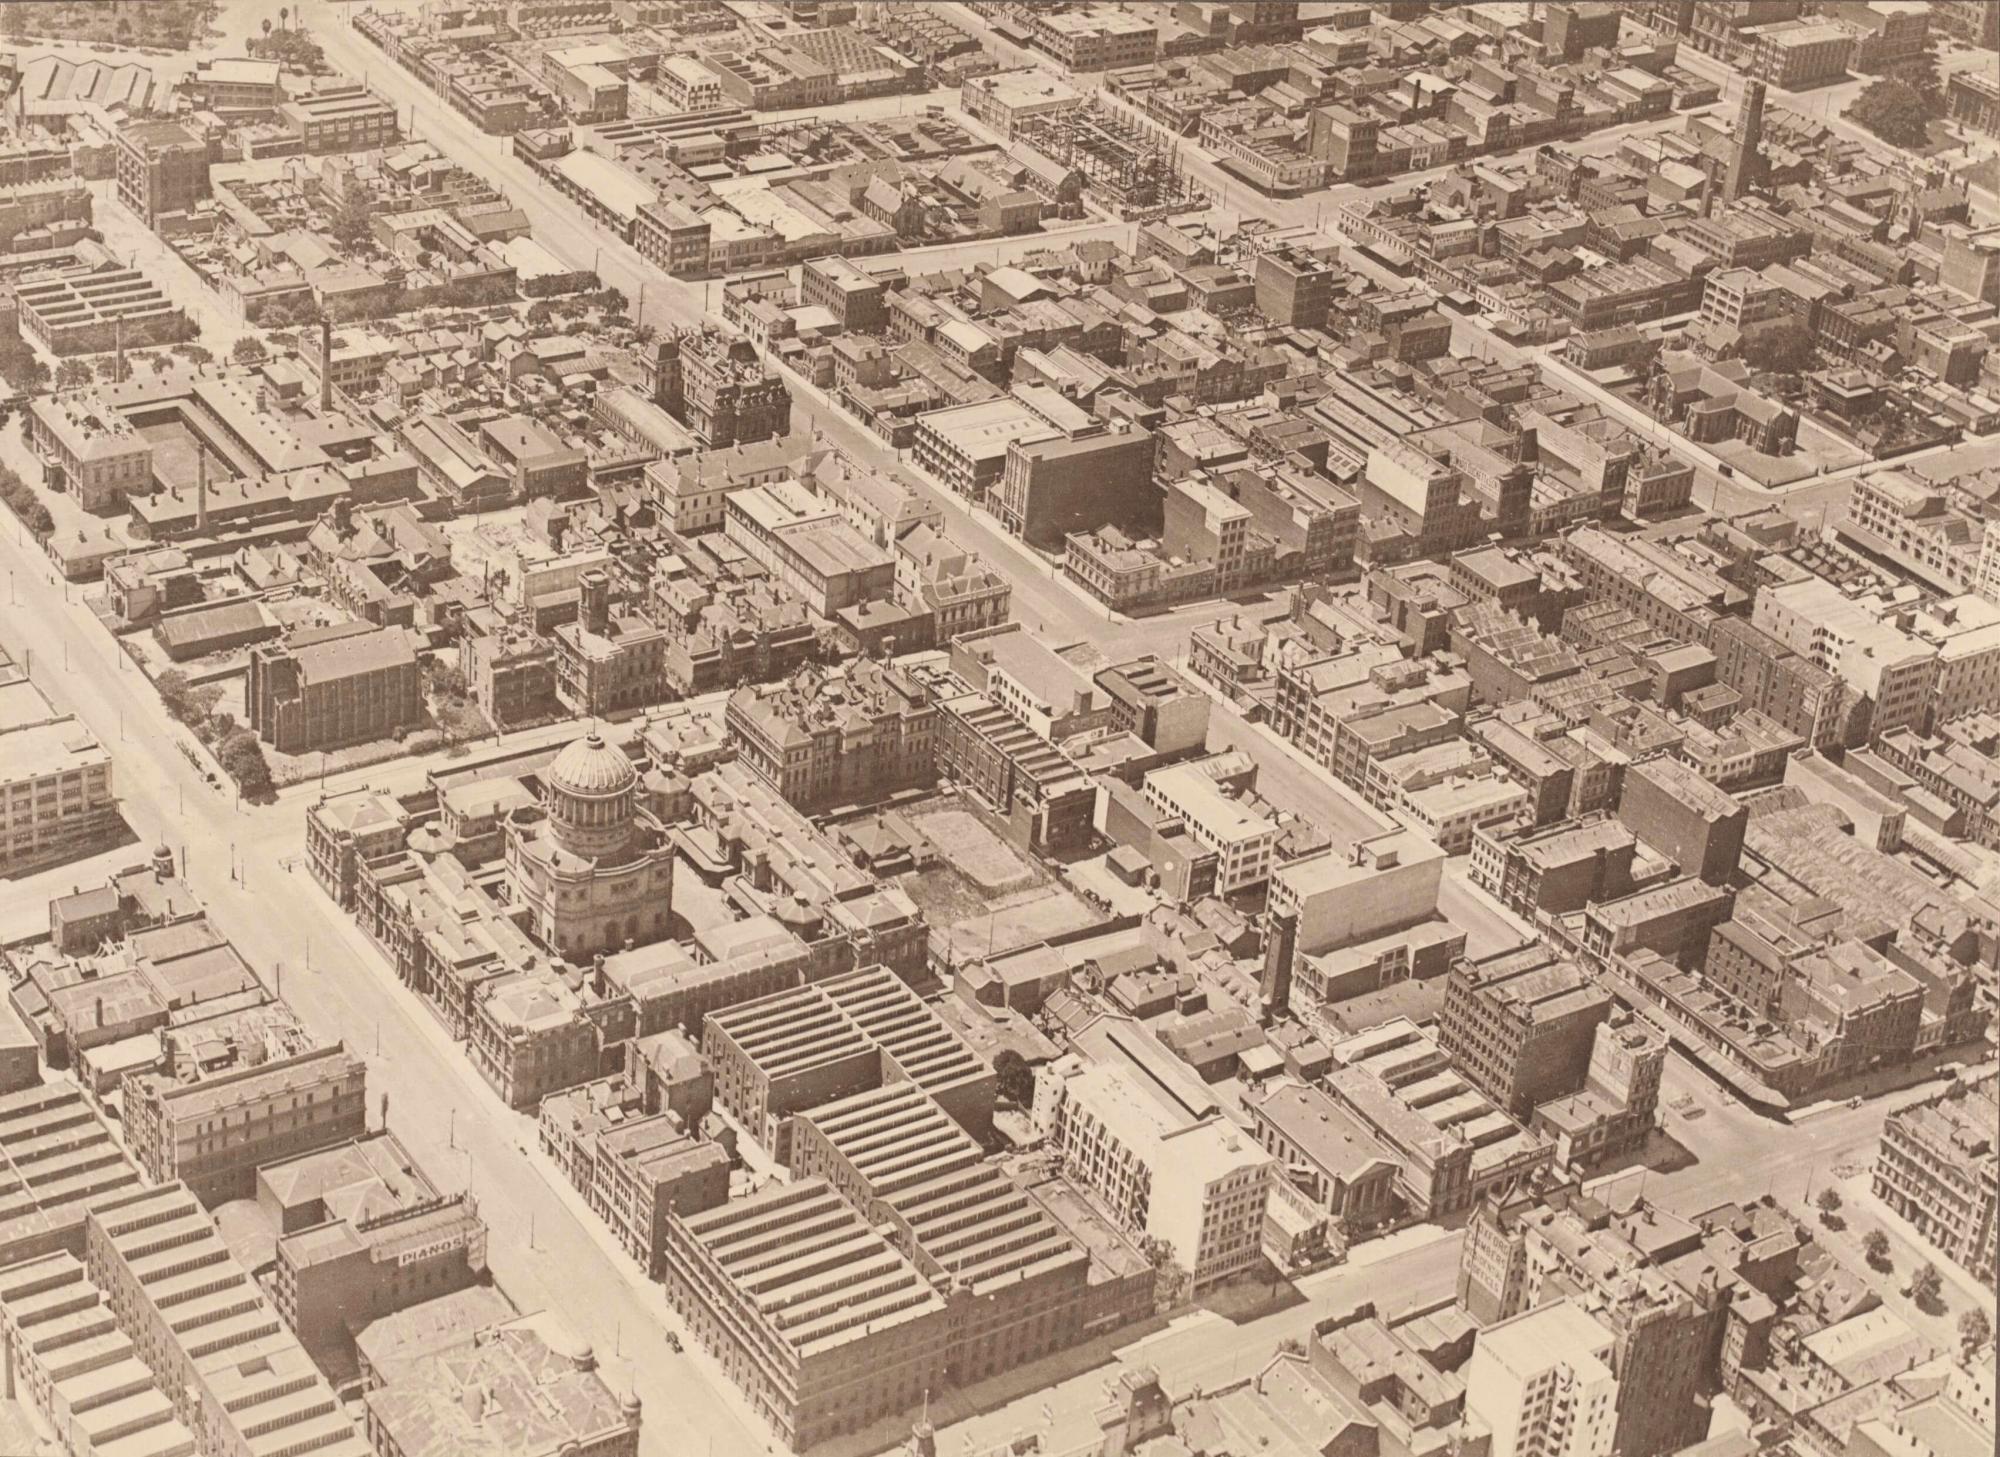 Black and white photograph showing an aerial view of Melbourne city showing. The image, taken in the early 1920's, show the Supreme Court amongst the other city buildings.